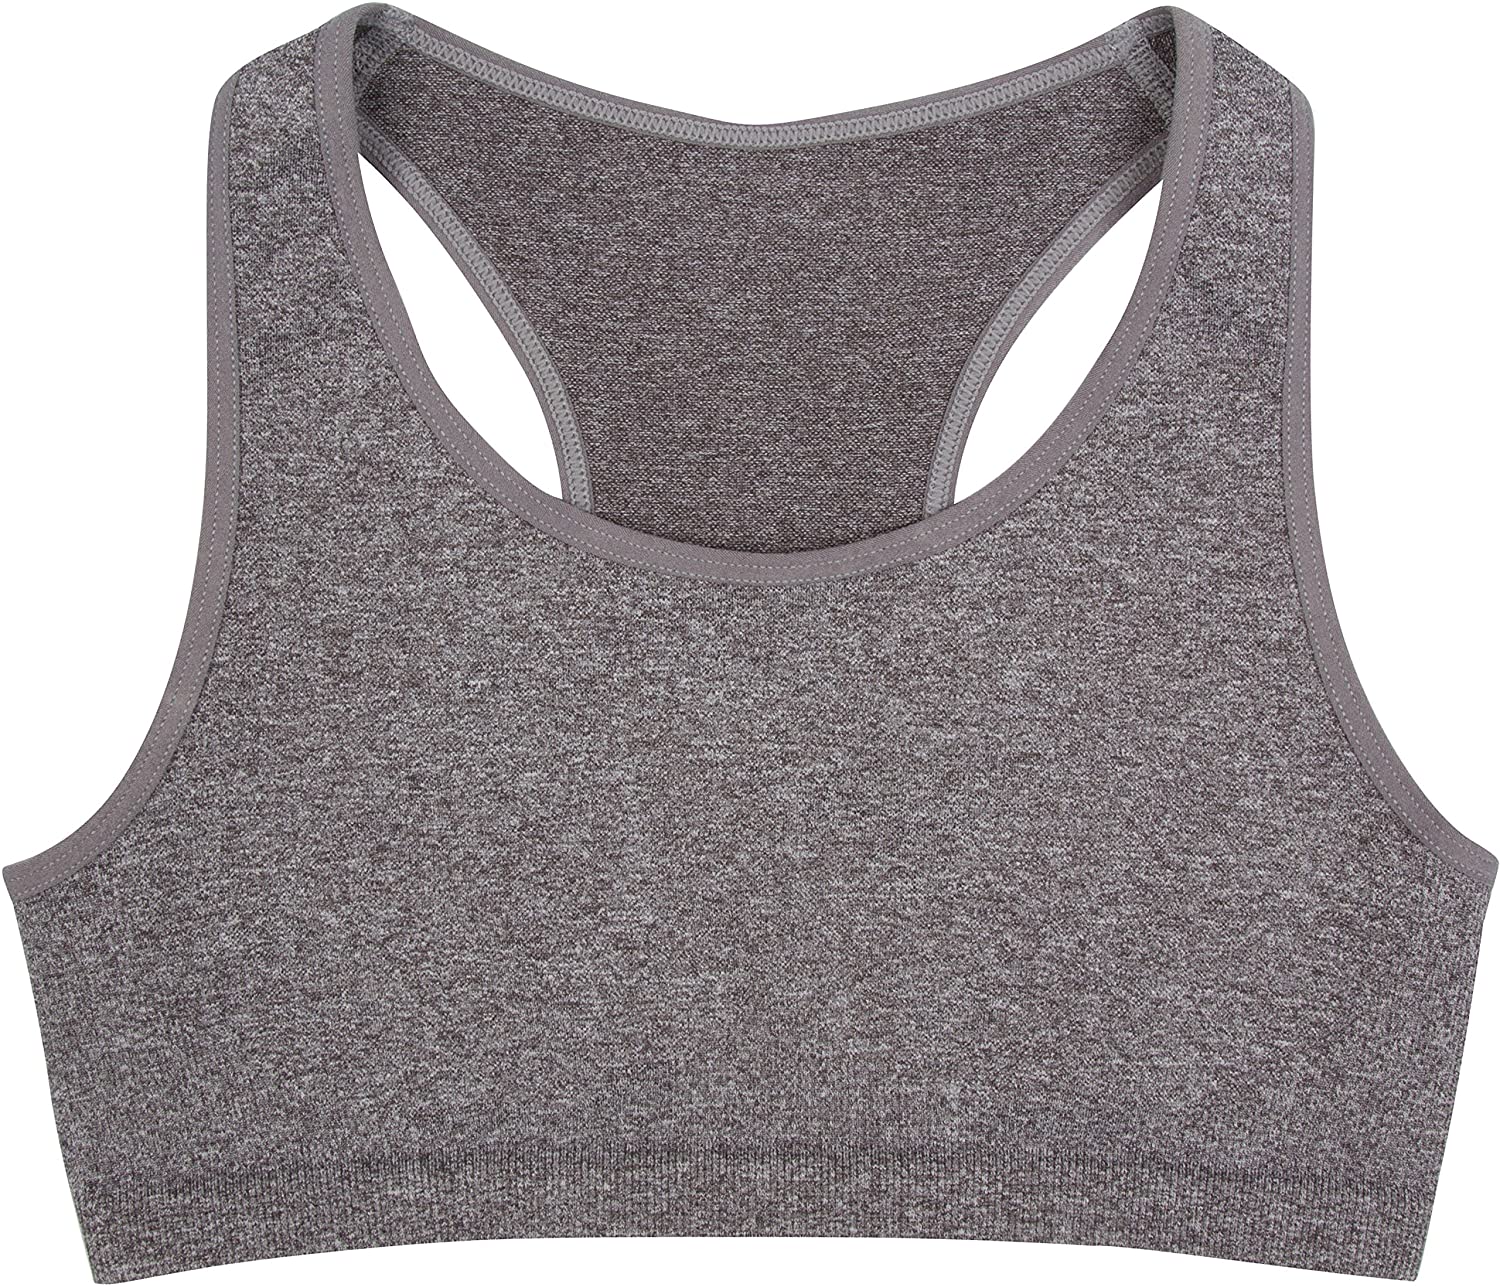 Price:$13.47    Active Performance Running Gym Athletic Sports Bra  Clothing